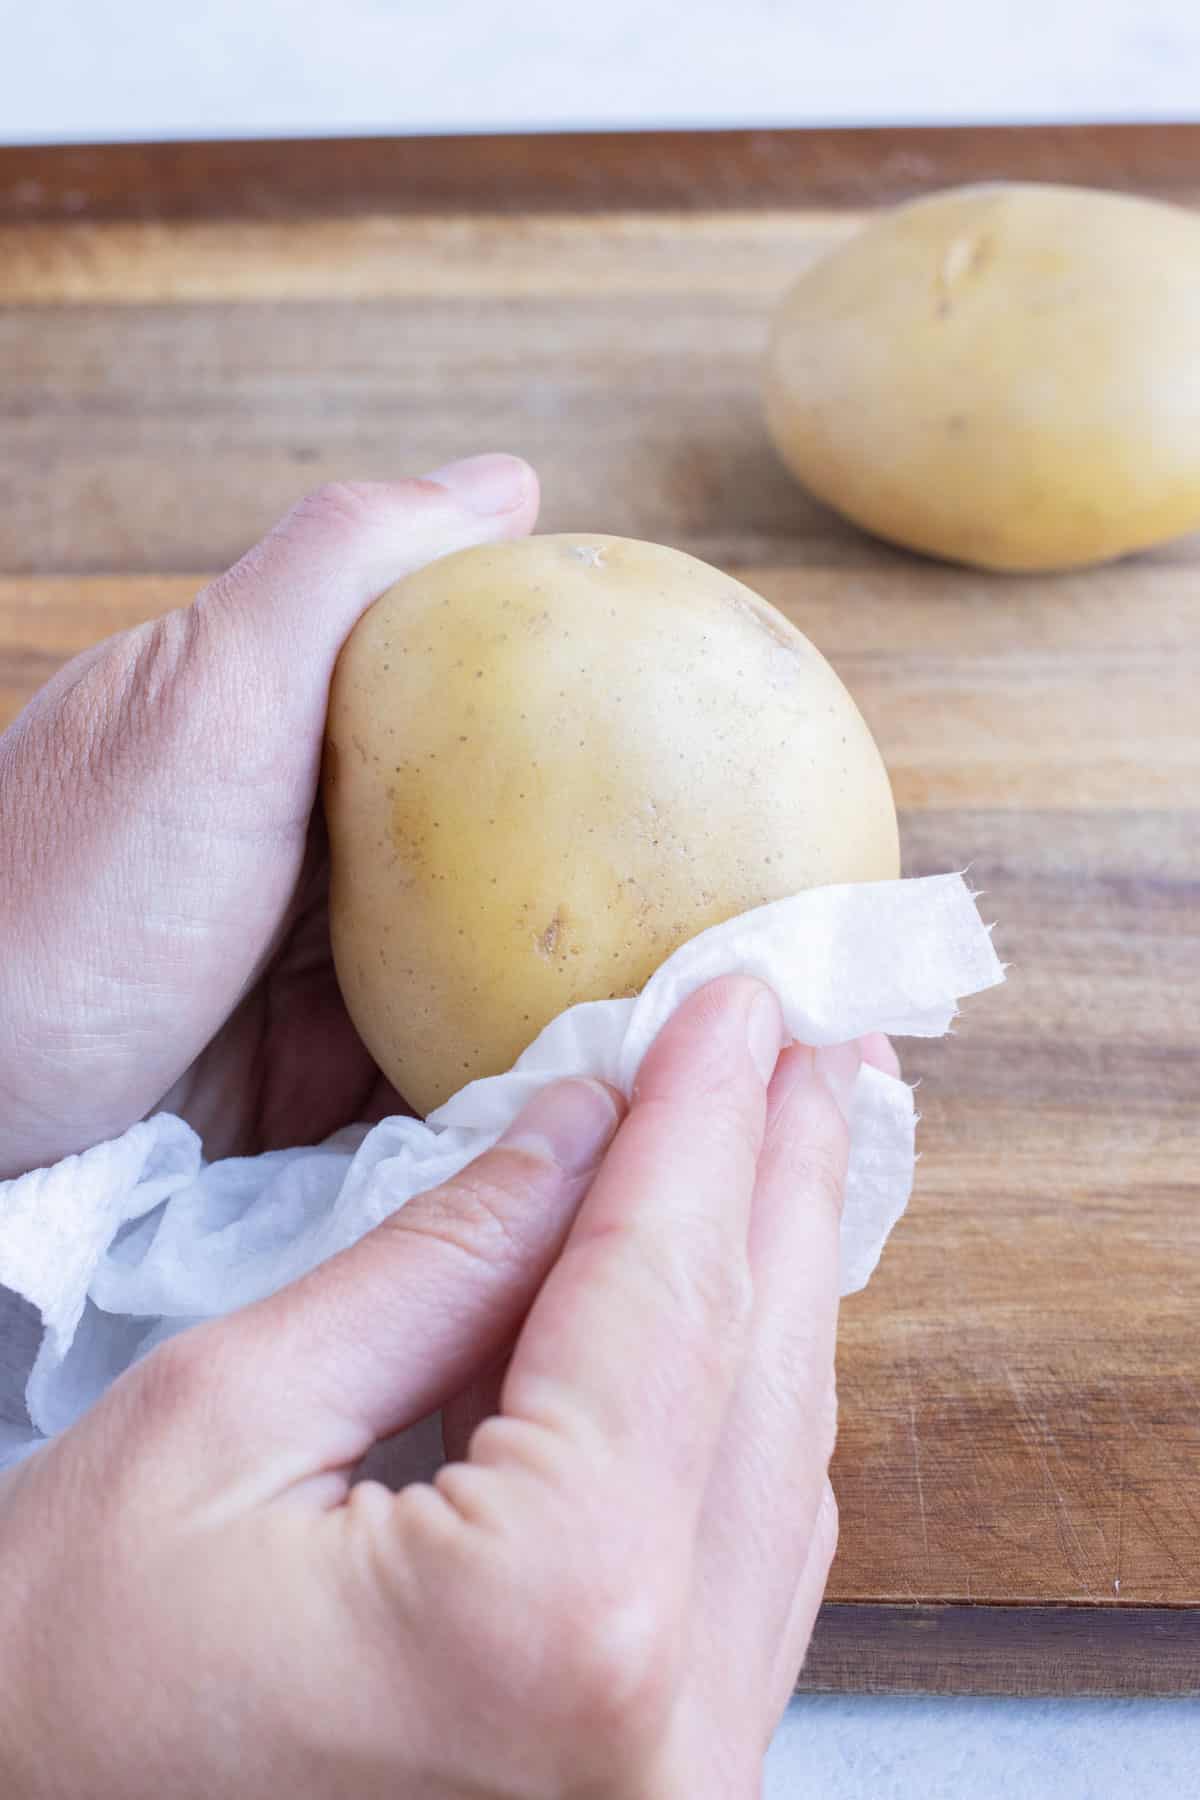 A potato being scrubbed before boiling.